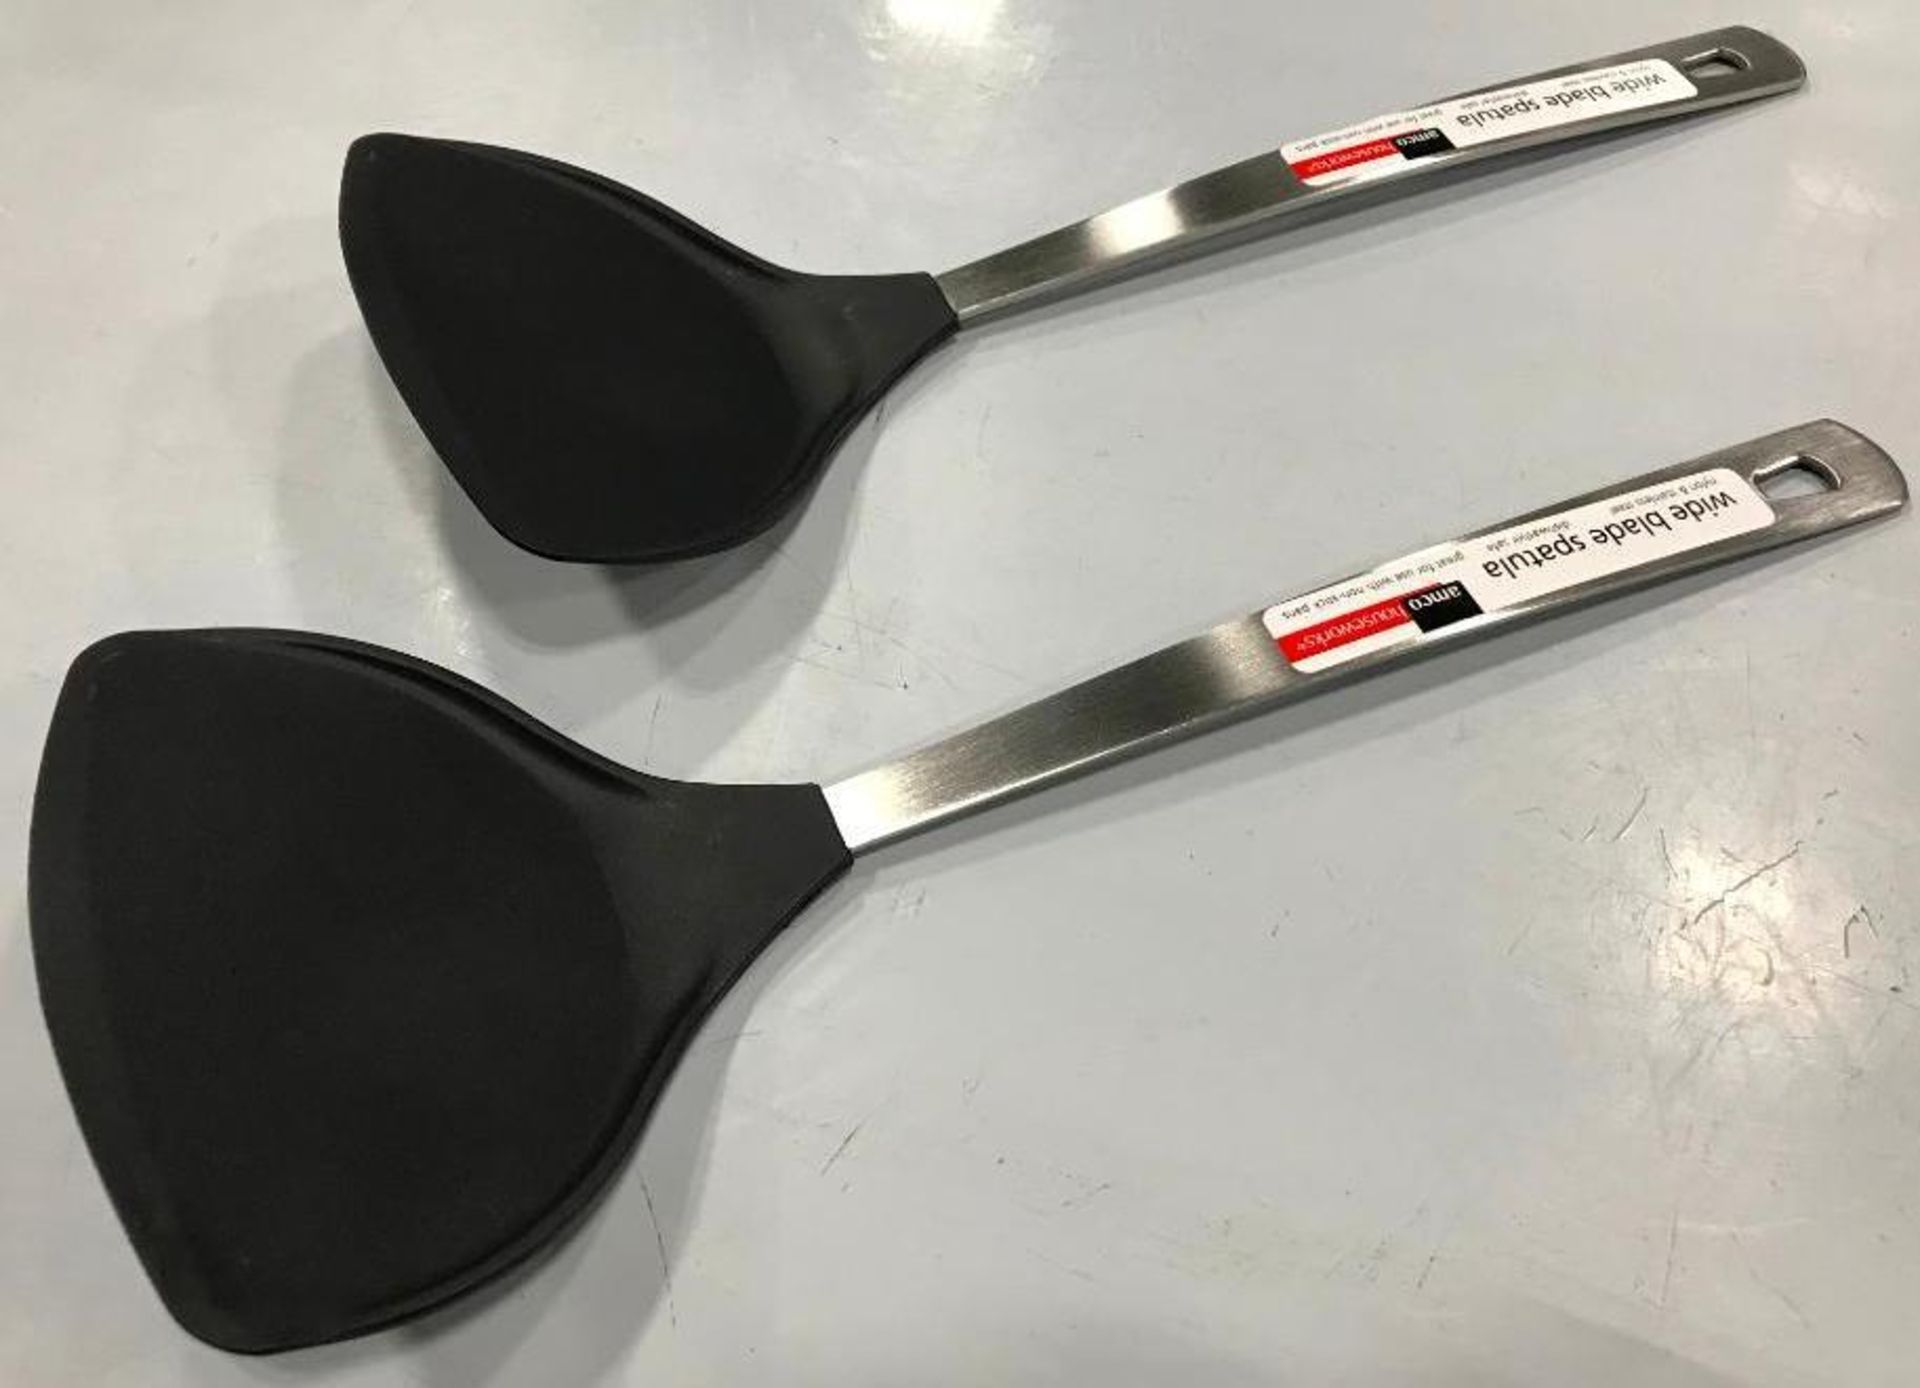 AMCO NYLON WIDE BLADE SPATULA - LOT OF 2 - NEW - Image 2 of 2